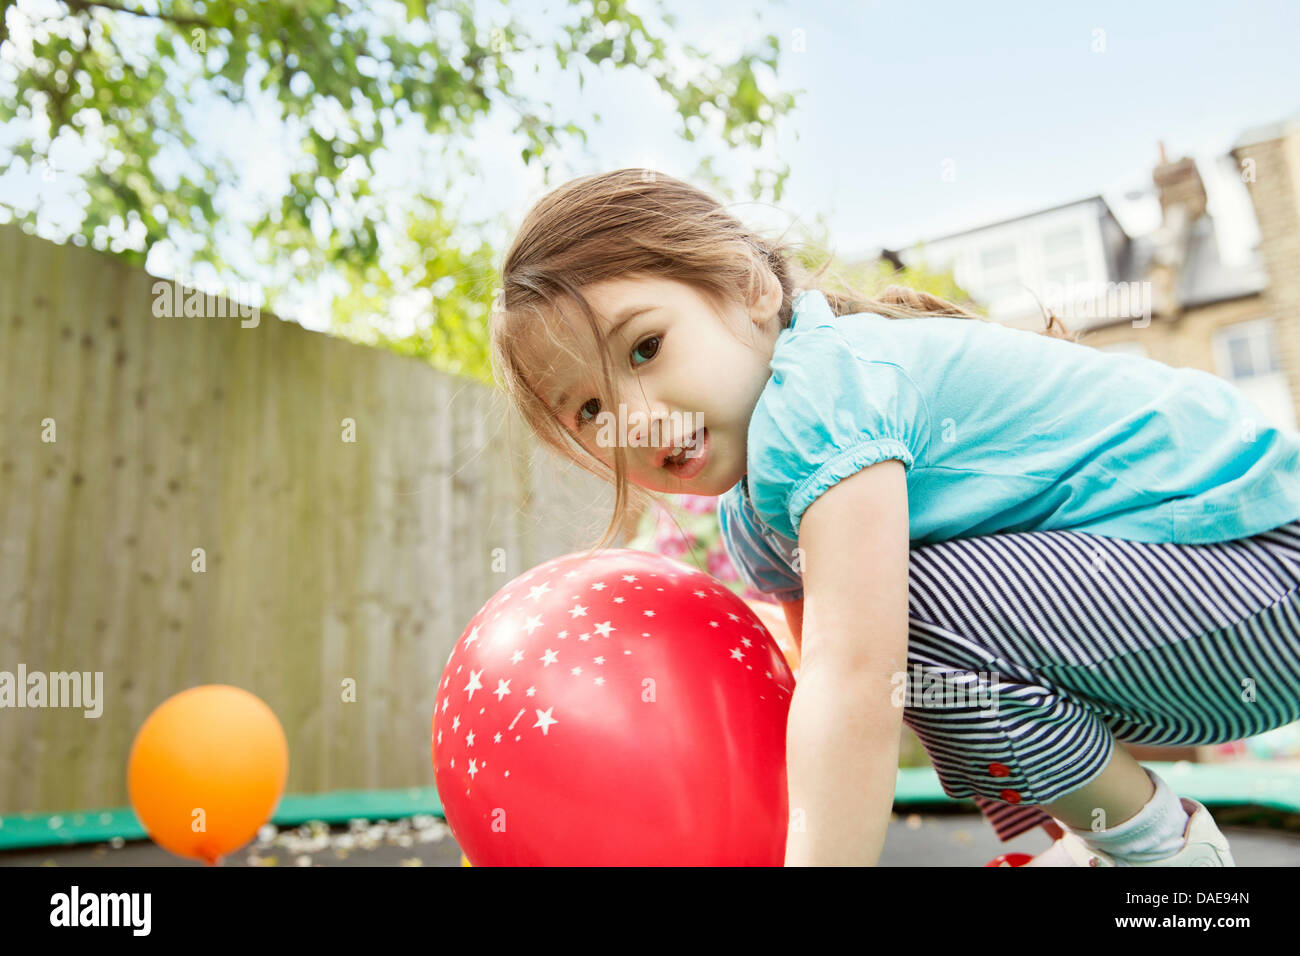 Young Girl playing in garden with balloons Banque D'Images